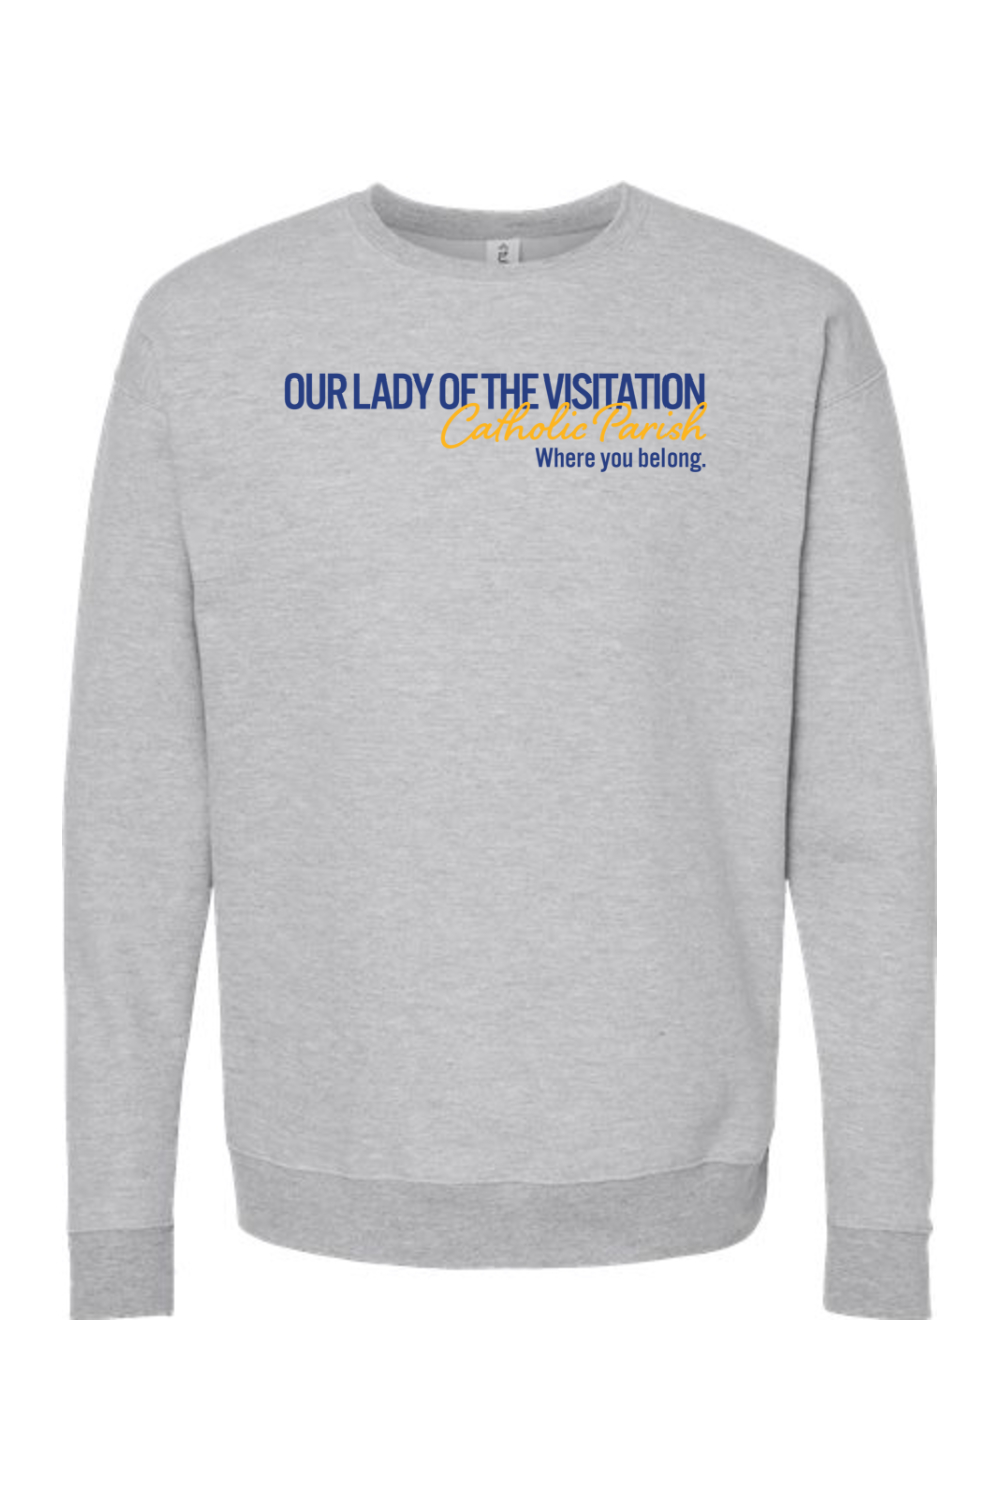 Our Lady of the Visitation Block Crewneck